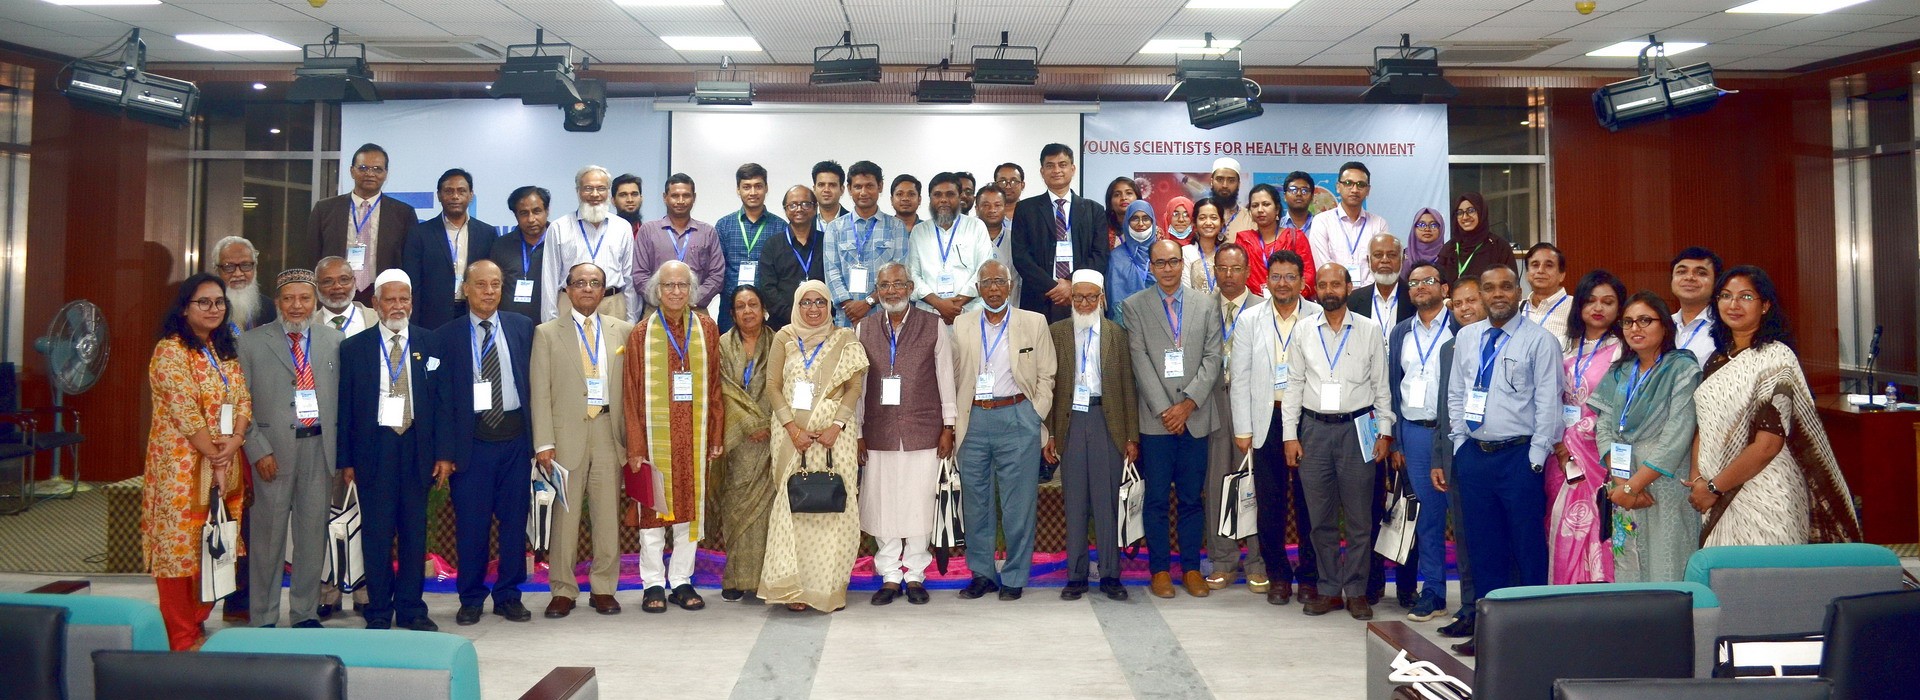 The Bangladesh Academy of Sciences (BAS) organized the 5th Young Scientists Congress (YSC5) was held on 25-27 November 2022 at the National Science & Technology Complex (Biggyan Bhaban), Agargaon, Dhaka-1207. The theme of the Congress this year is ‘Young Scientists for Health & Environment’. Experience from the previous events of the Series shows that the Congress provides a unique multidisciplinary environment and opportunity for the young scientists to exchange views and ideas among themselves. 